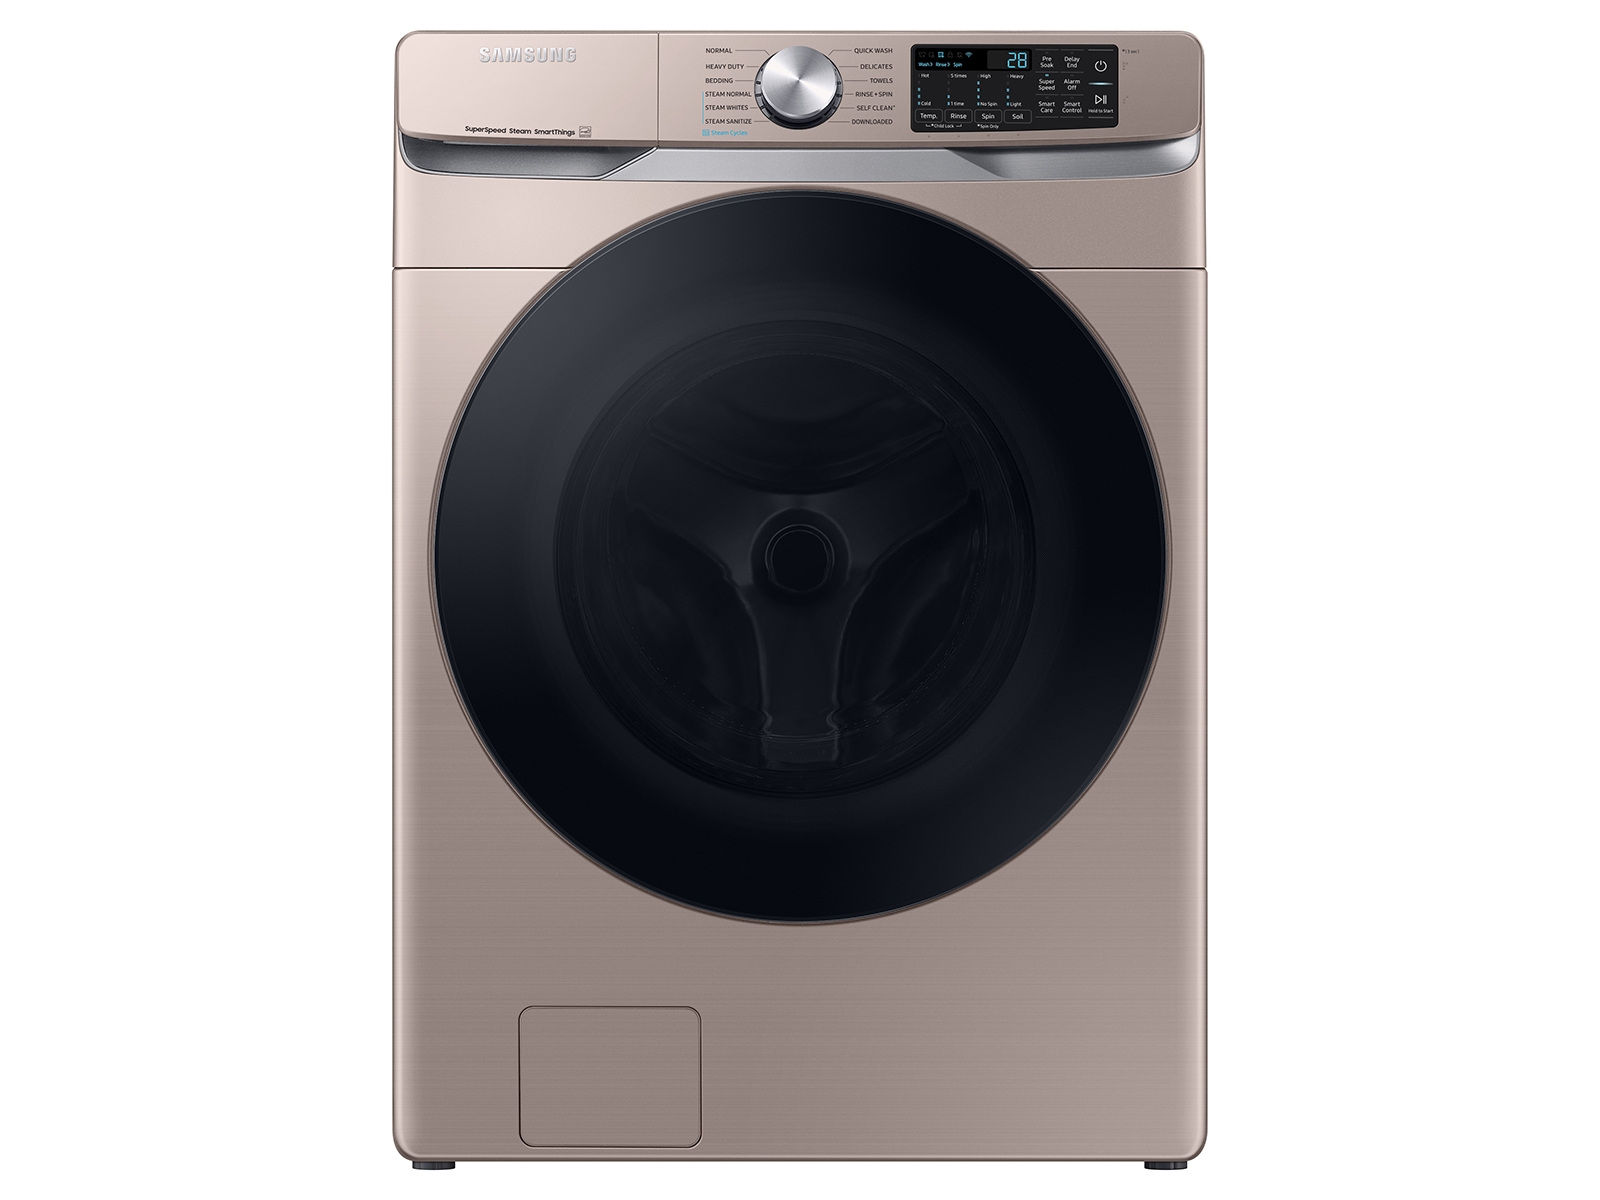 Samsung 4.5 cu. ft. Large Capacity Smart Front Load Washer with Super Speed Wash in Champagne(WF45B6300AC/US)